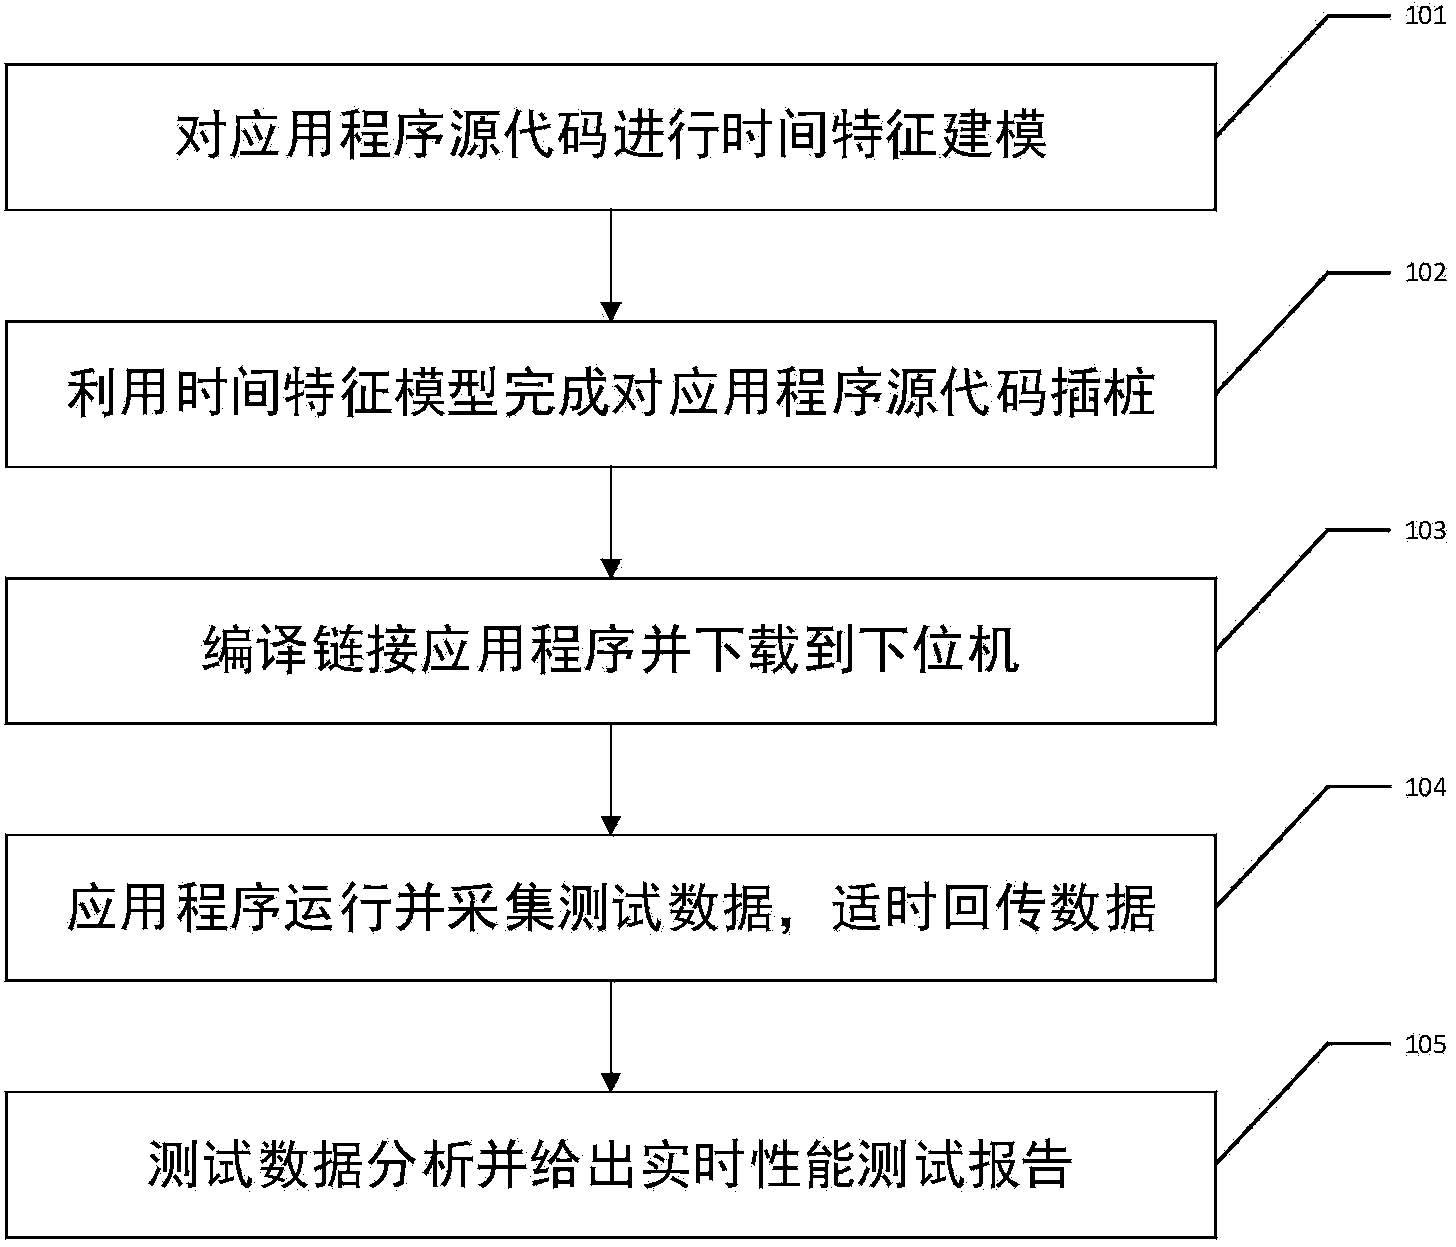 Real-time performance test method and system